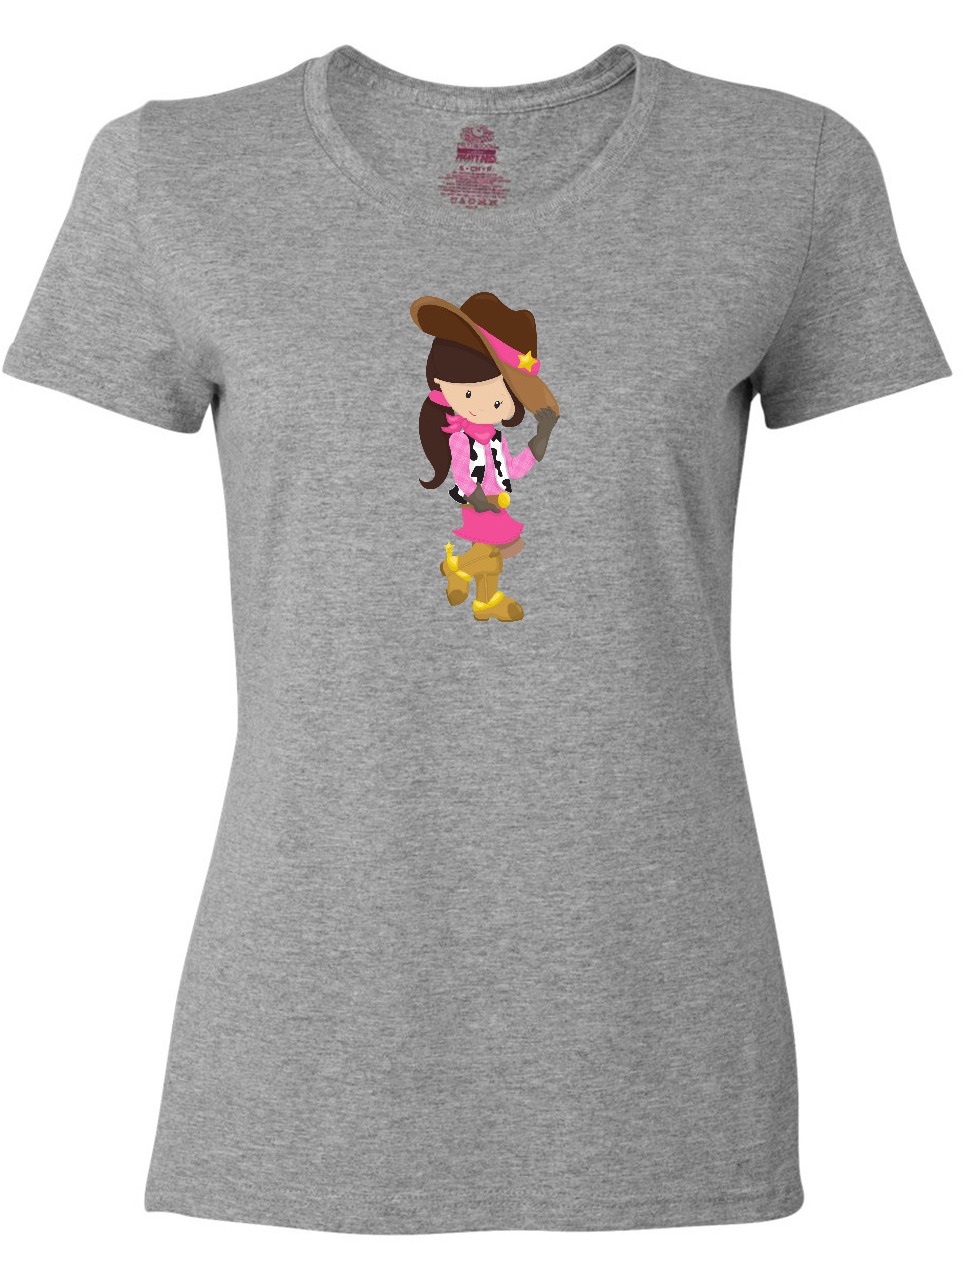 Inktastic Cowboy Girl, Girl With Cowboy Hat, Brown Hair Women's T-Shirt - image 1 of 4